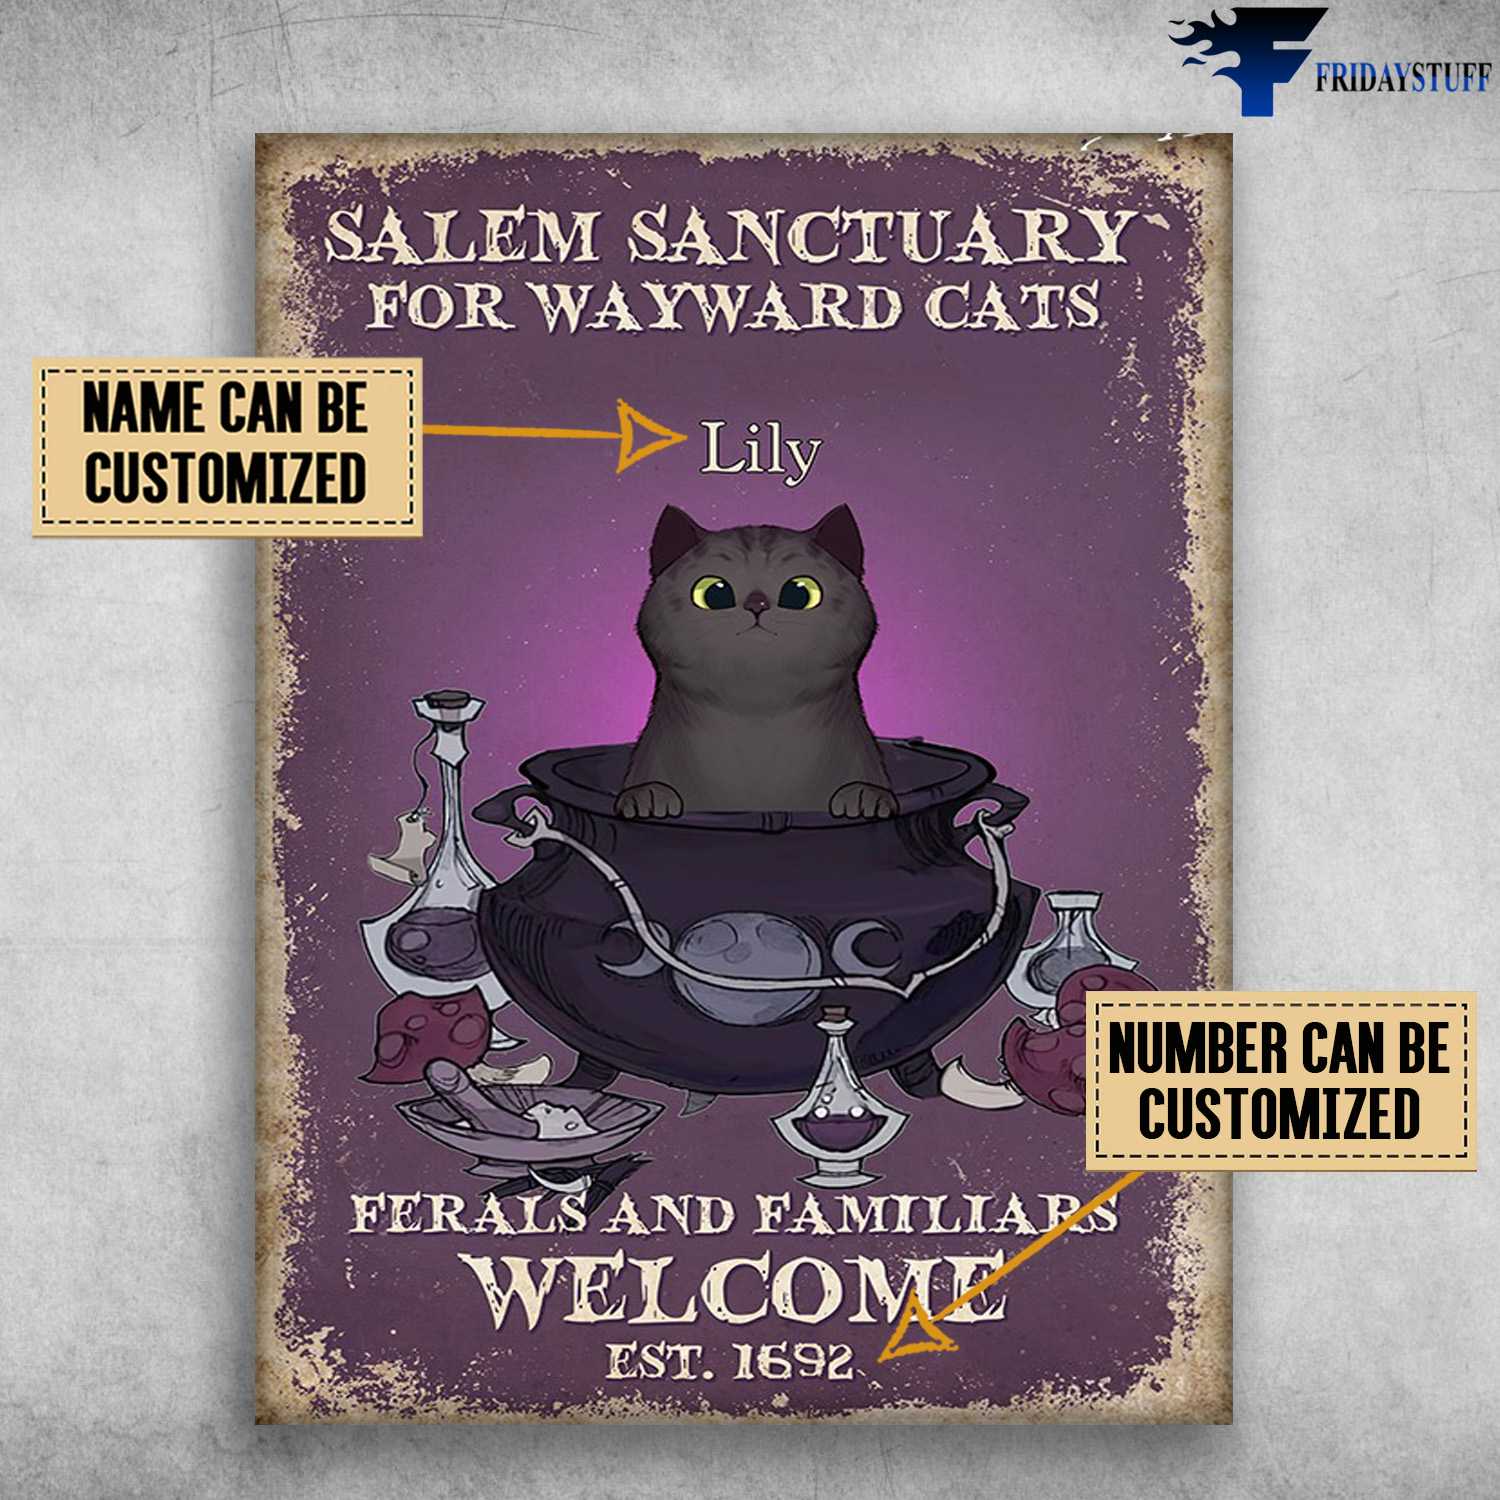 Black Cat Halloween, Witch Poster, Salem Sanctuary, For Wayward Cats, Ferals And Familiars